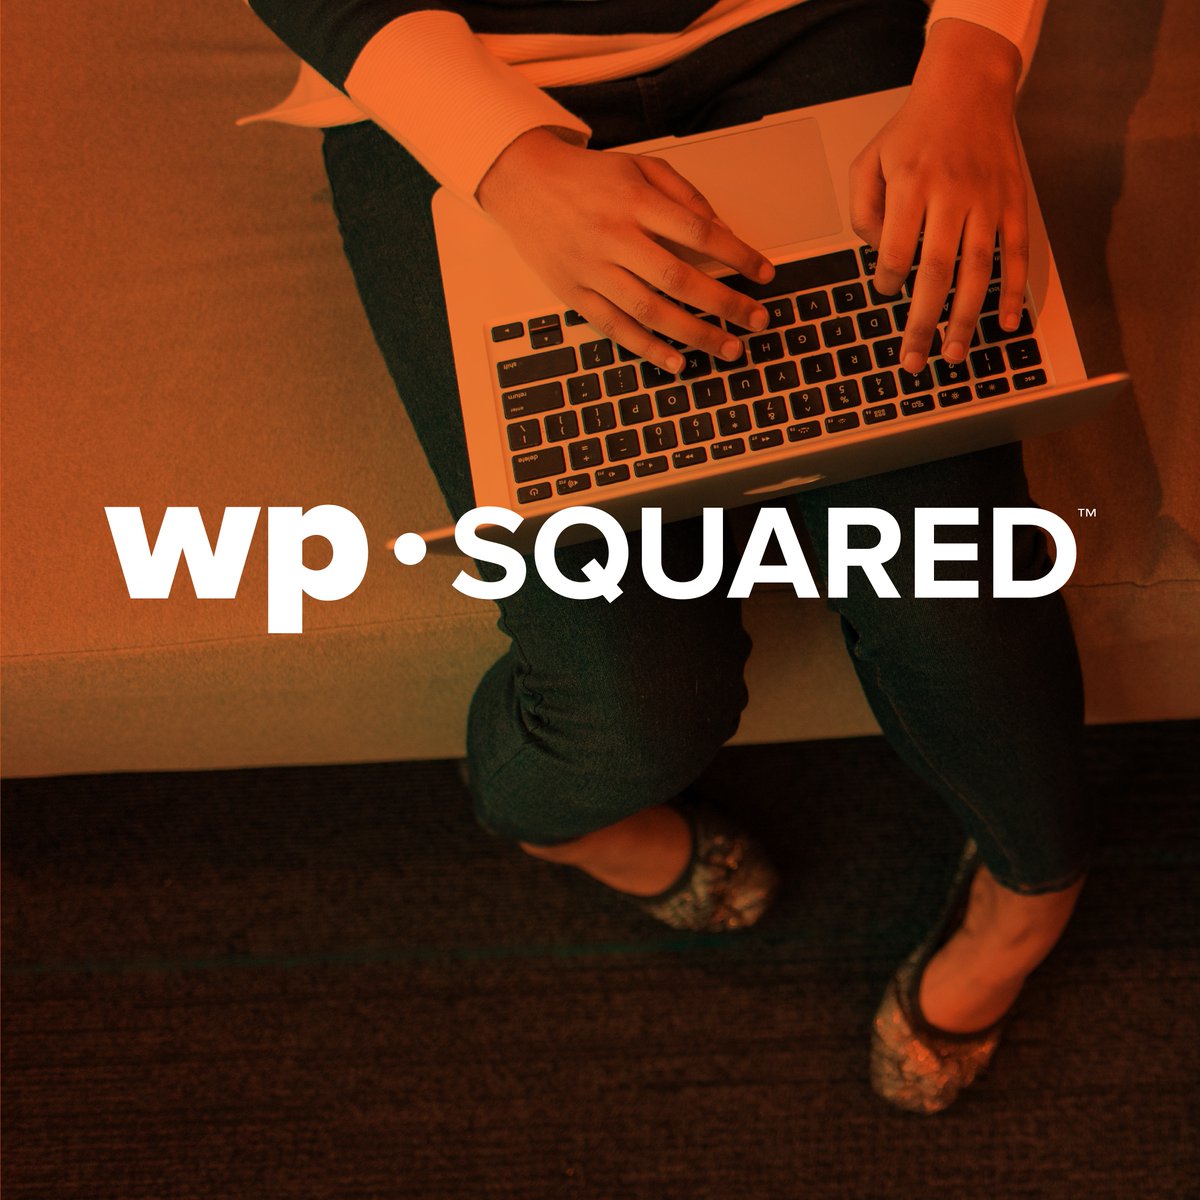 🔧 Ready to wrench your WordPress game up a level? WP Squared is like the ultimate mechanic for your WordPress sites. With intuitive features and robust capabilities - all powered by cPanel, your WordPress website management will become turbocharged! 💪 wpsquared.com